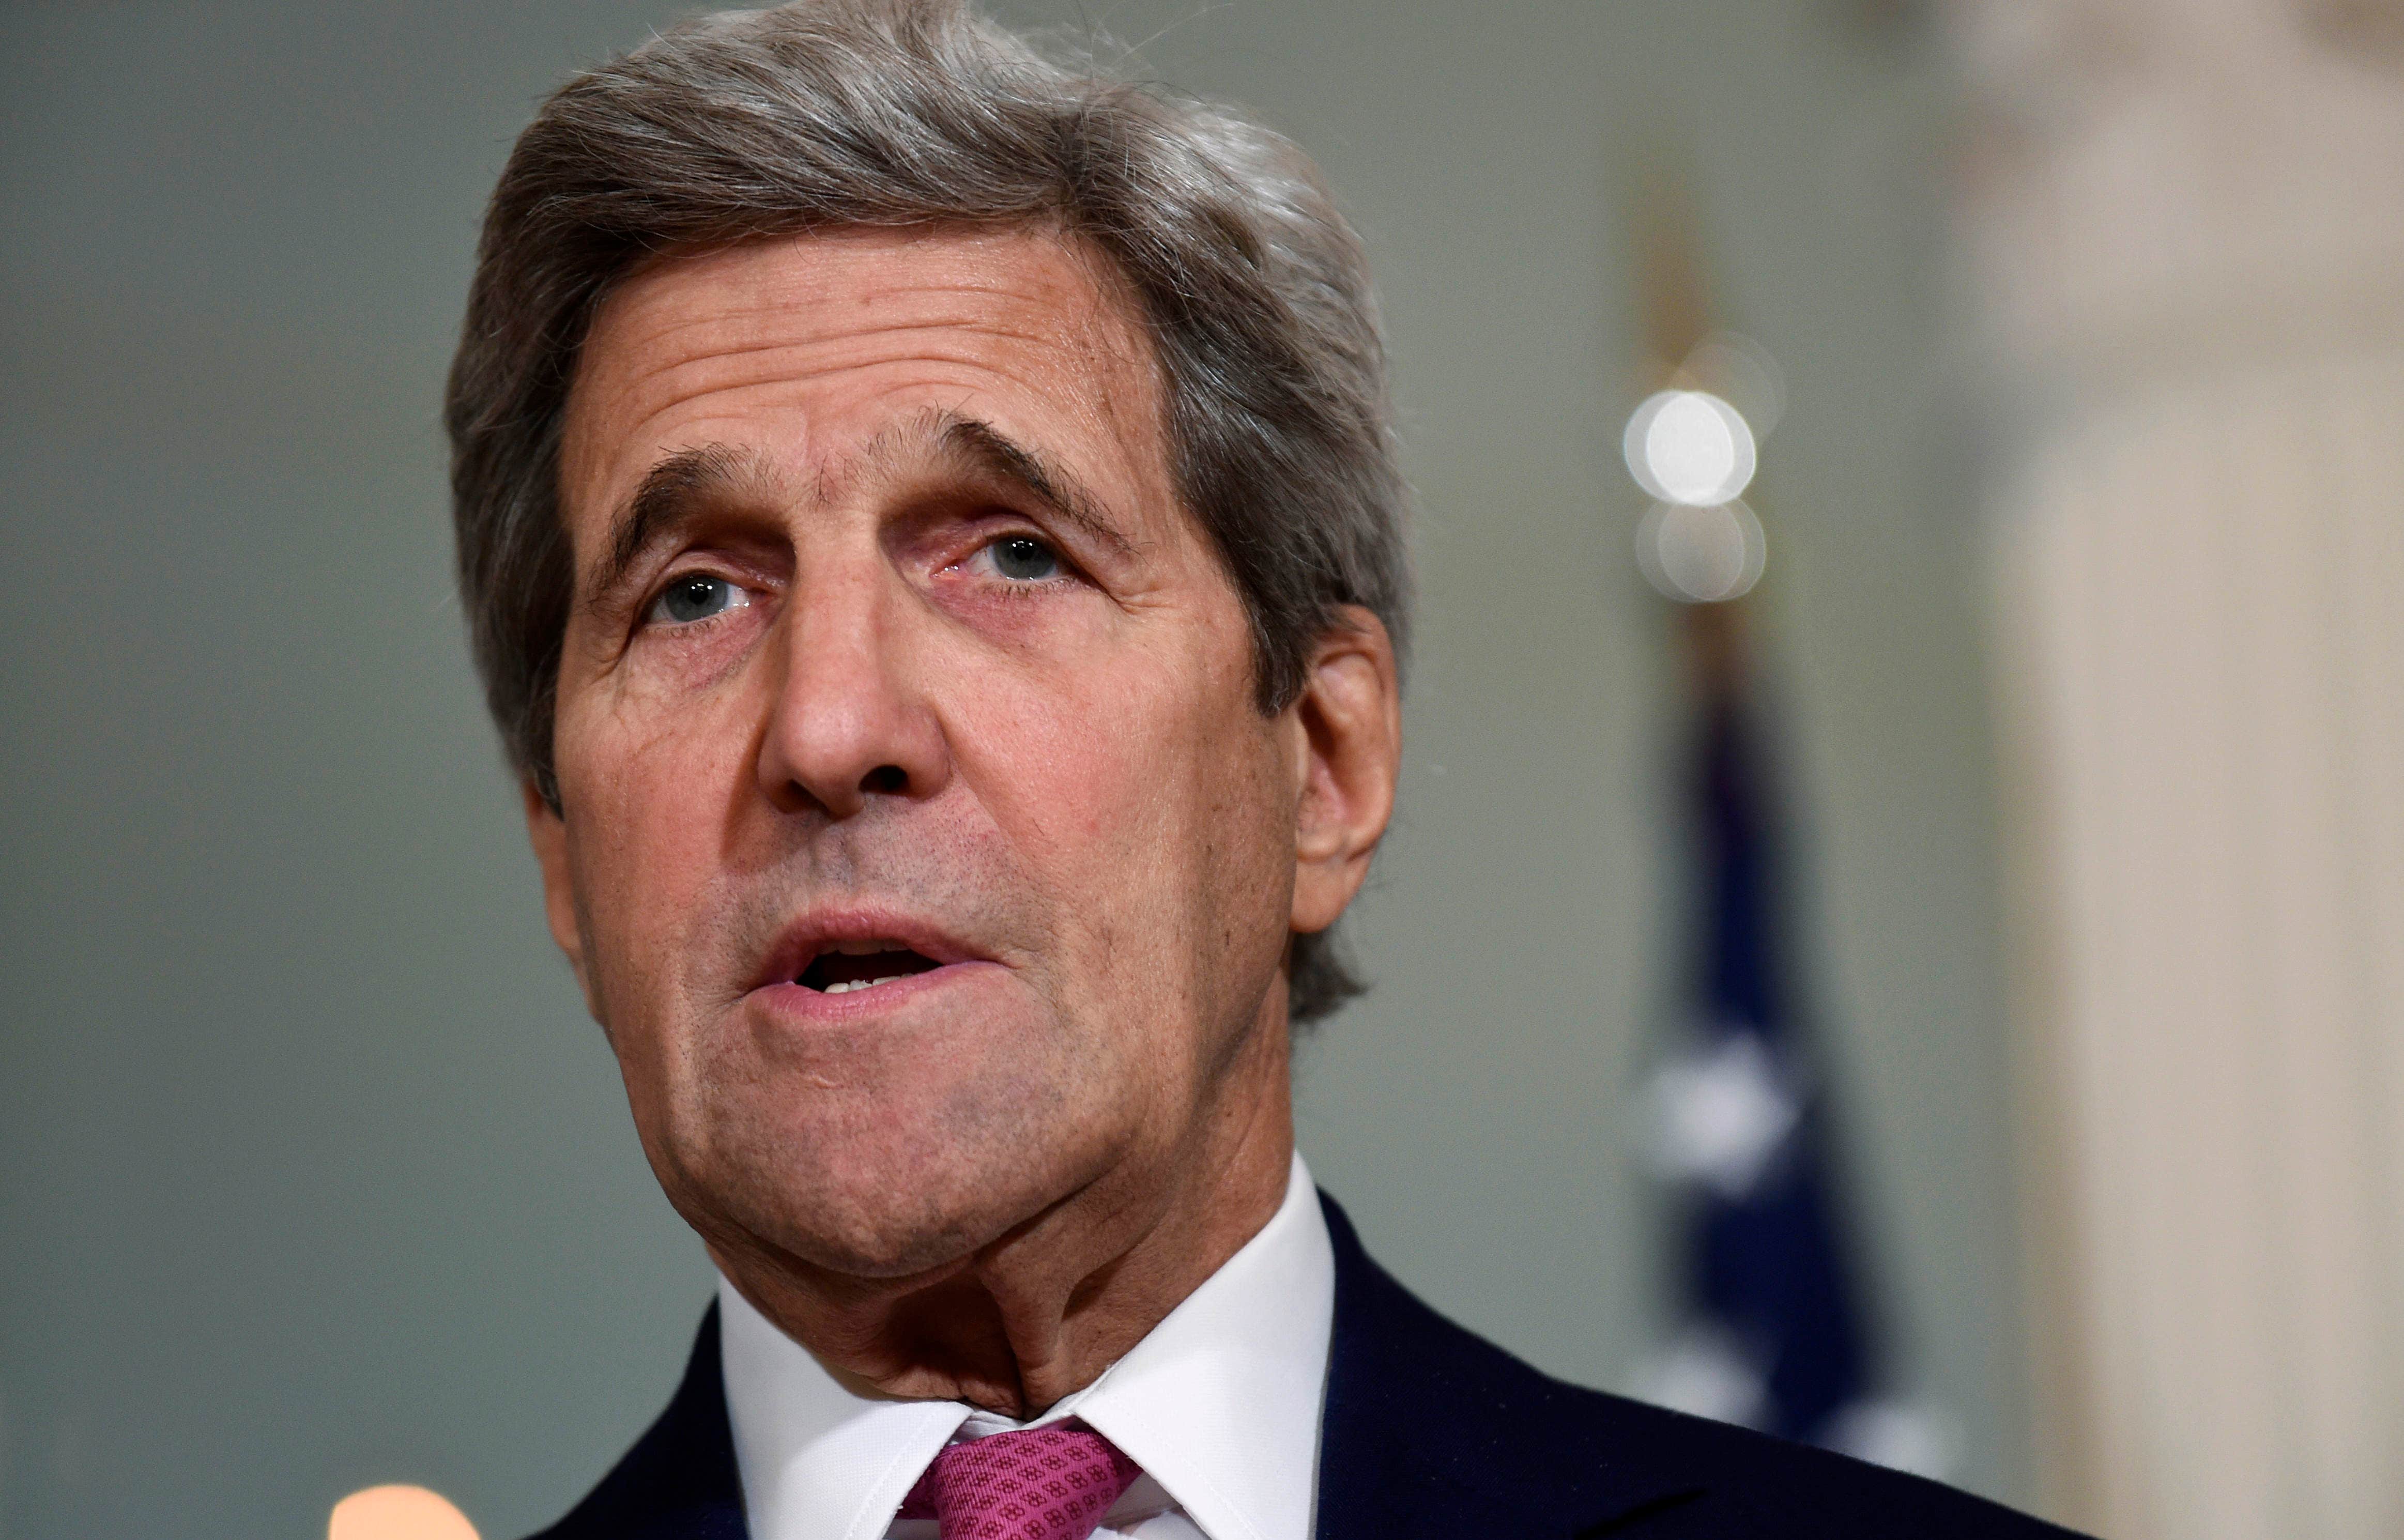 John Kerry goes viral after saying Biden ‘literally had not been aware’ of what led to US-France dustup – Fox News